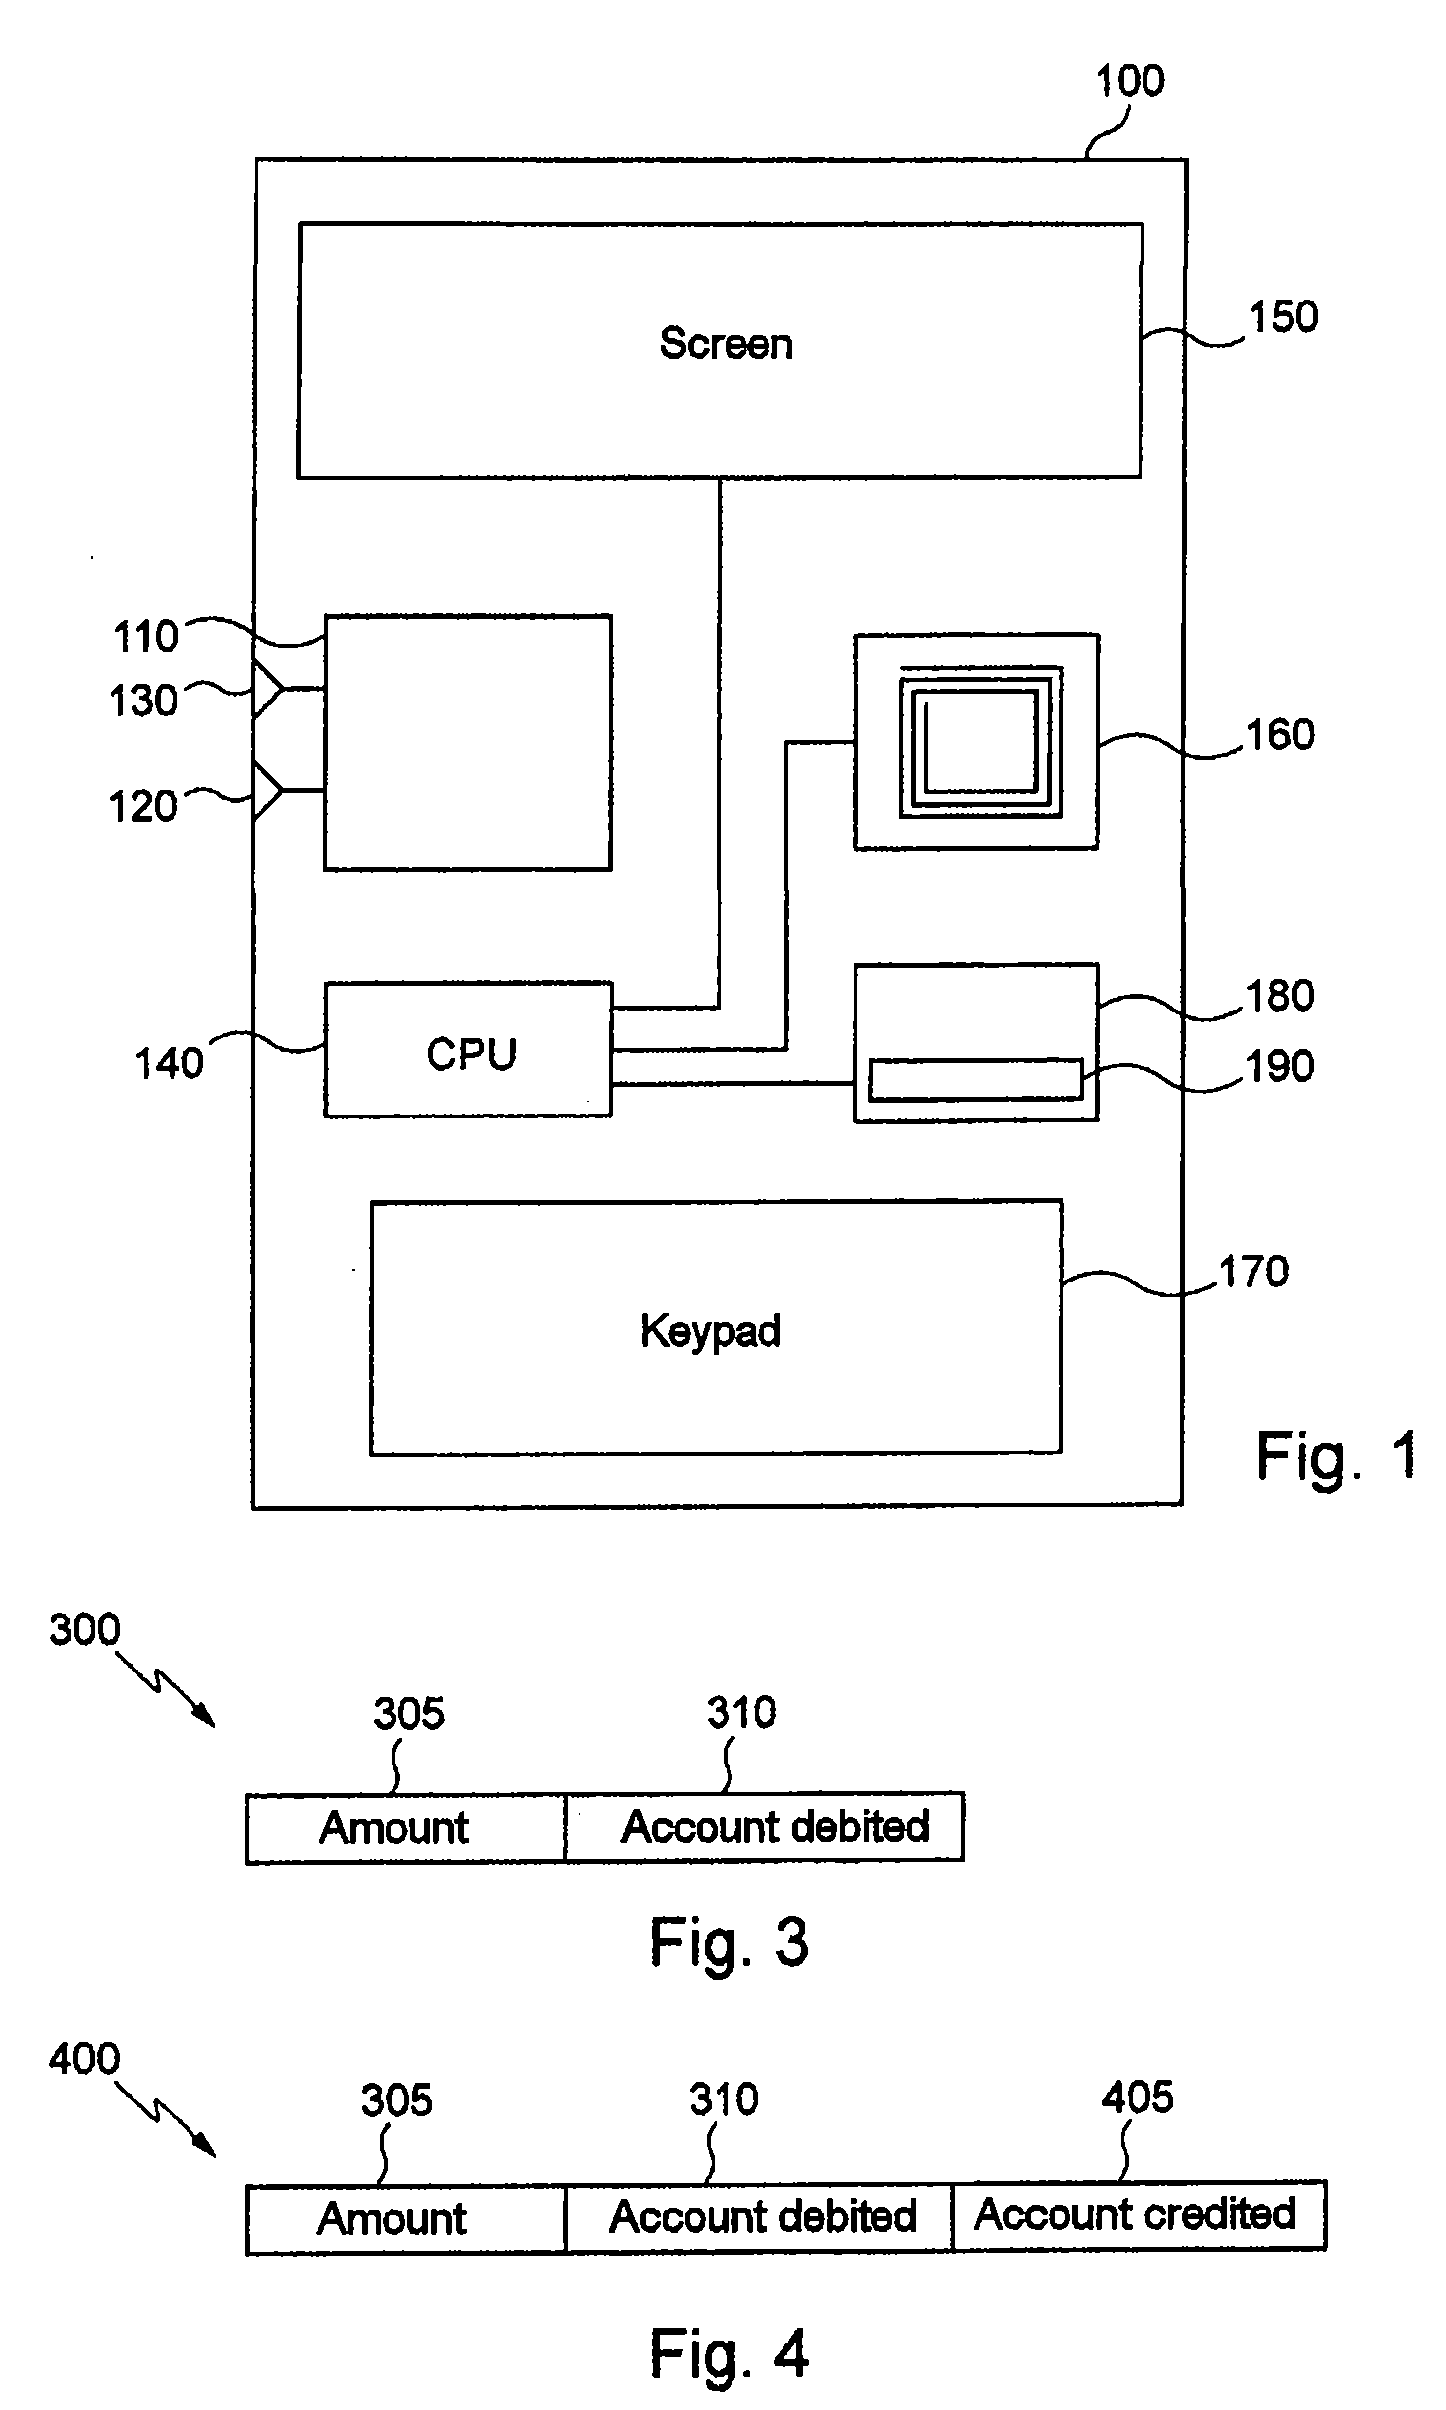 Method and device for exchanging values between personal protable electronic entities